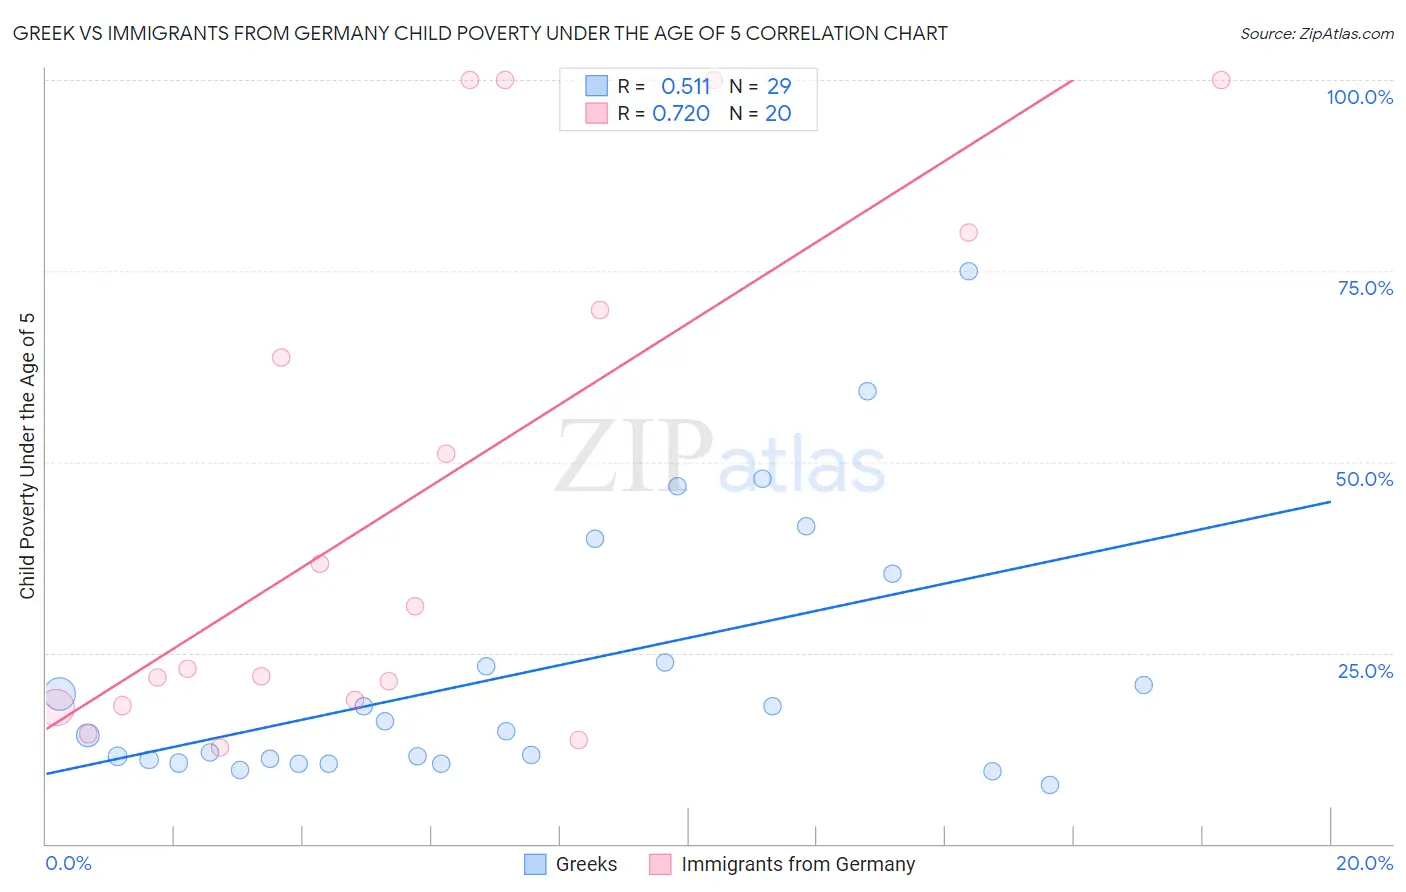 Greek vs Immigrants from Germany Child Poverty Under the Age of 5